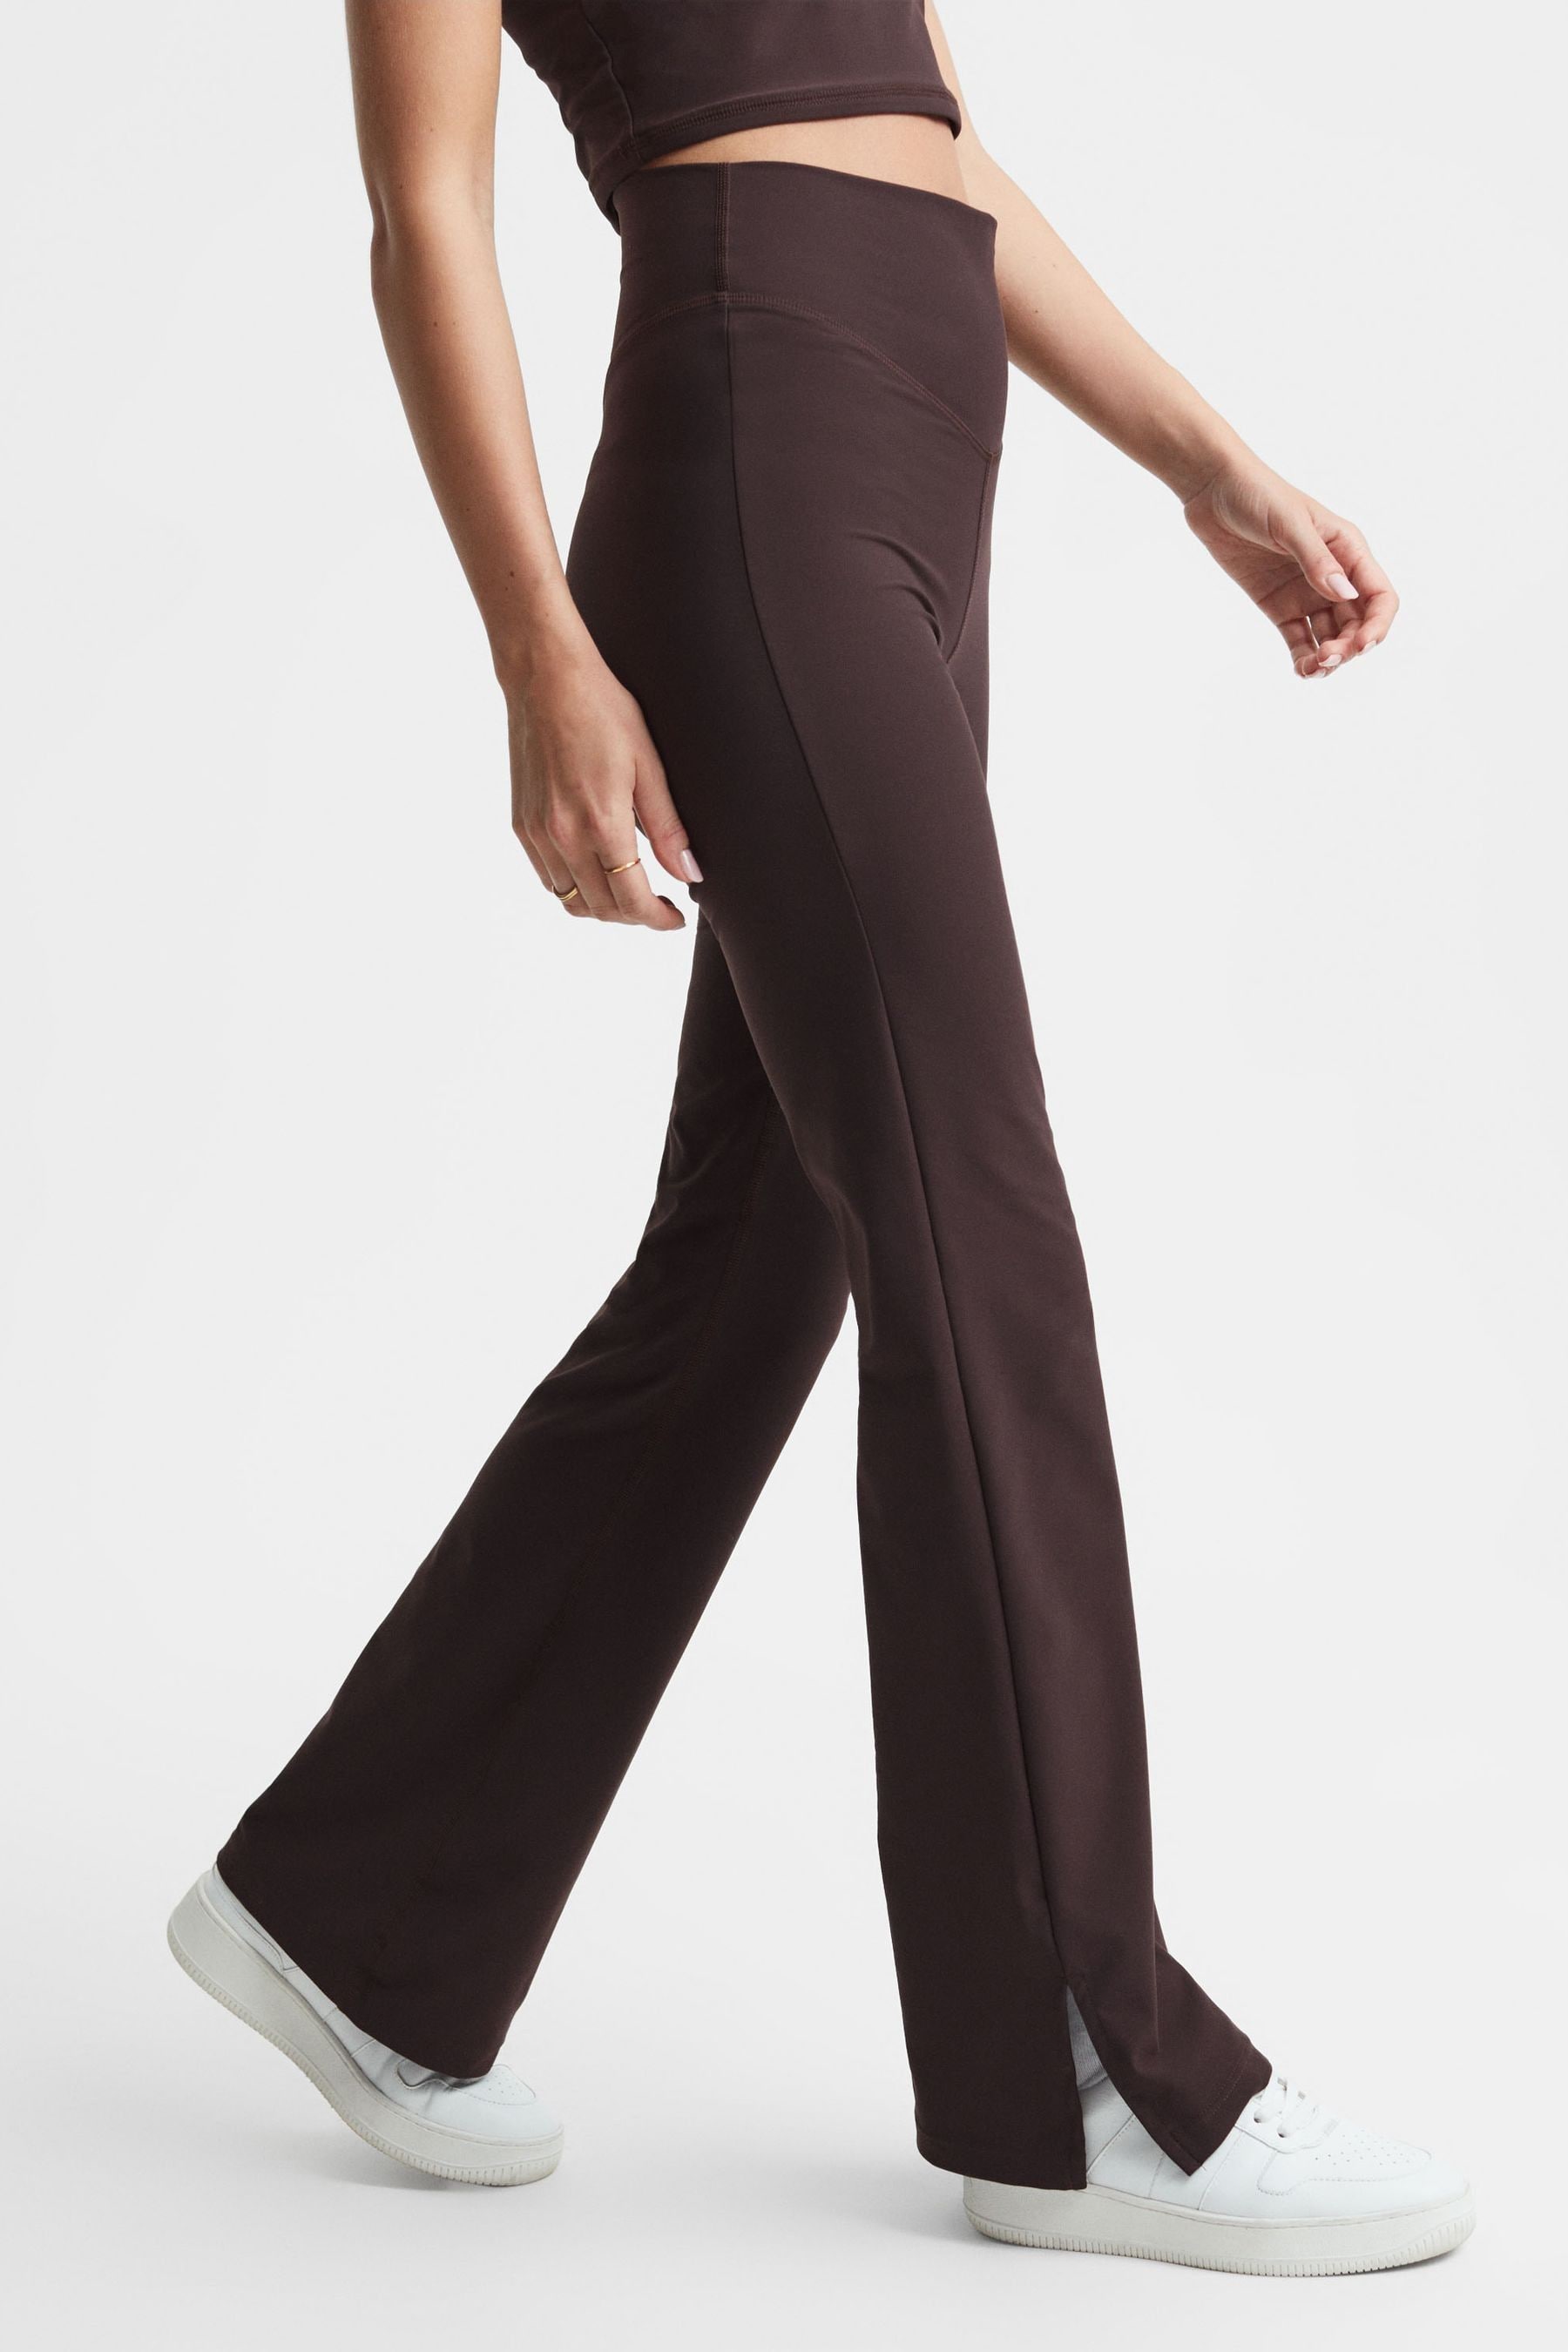 The Upside High Rise Flared Leggings In Brown